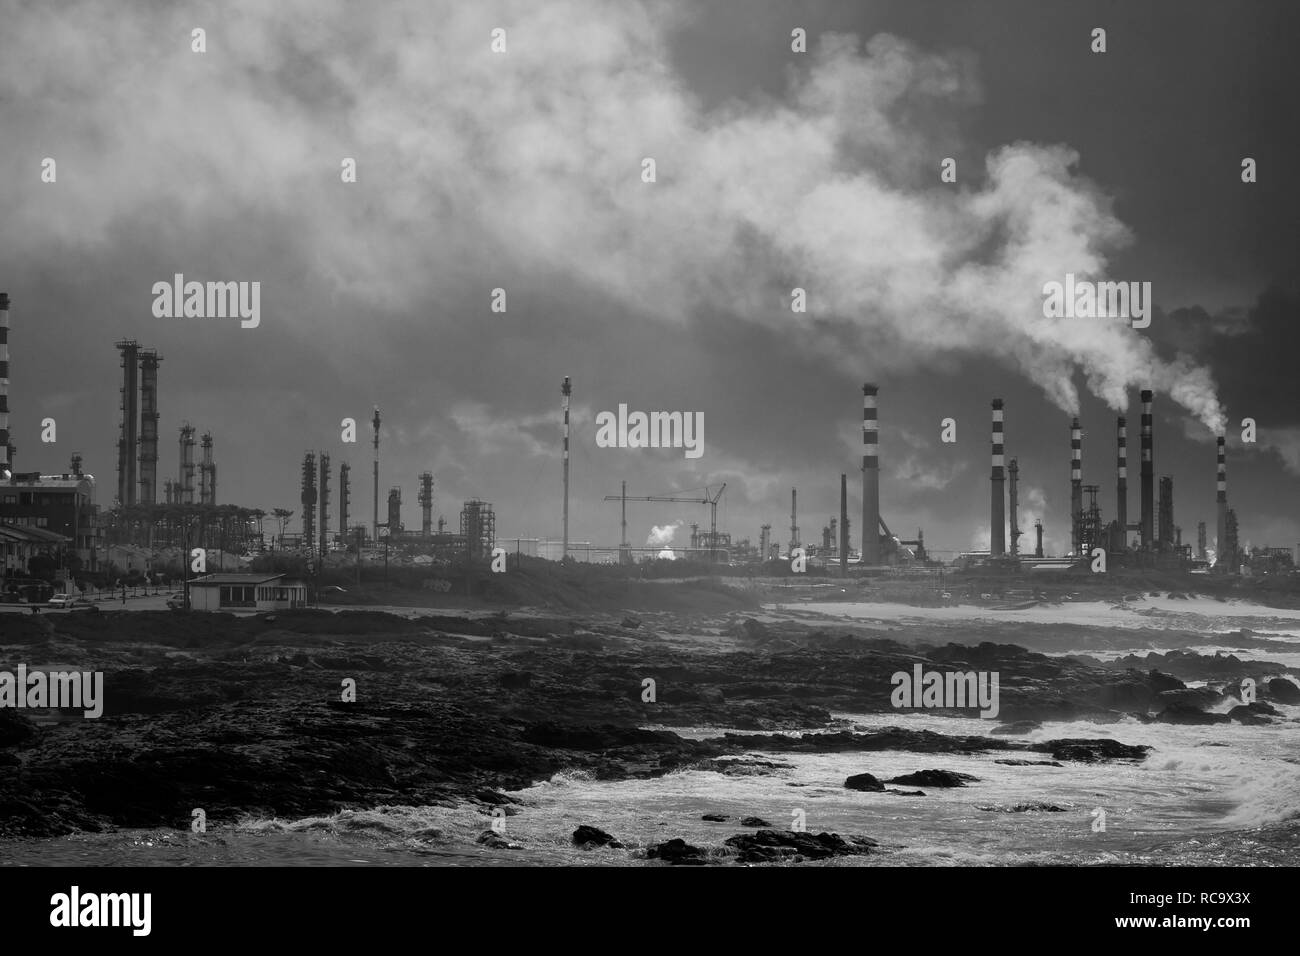 Oil refinery by the sea before rain and storm. Converted black and white. Stock Photo